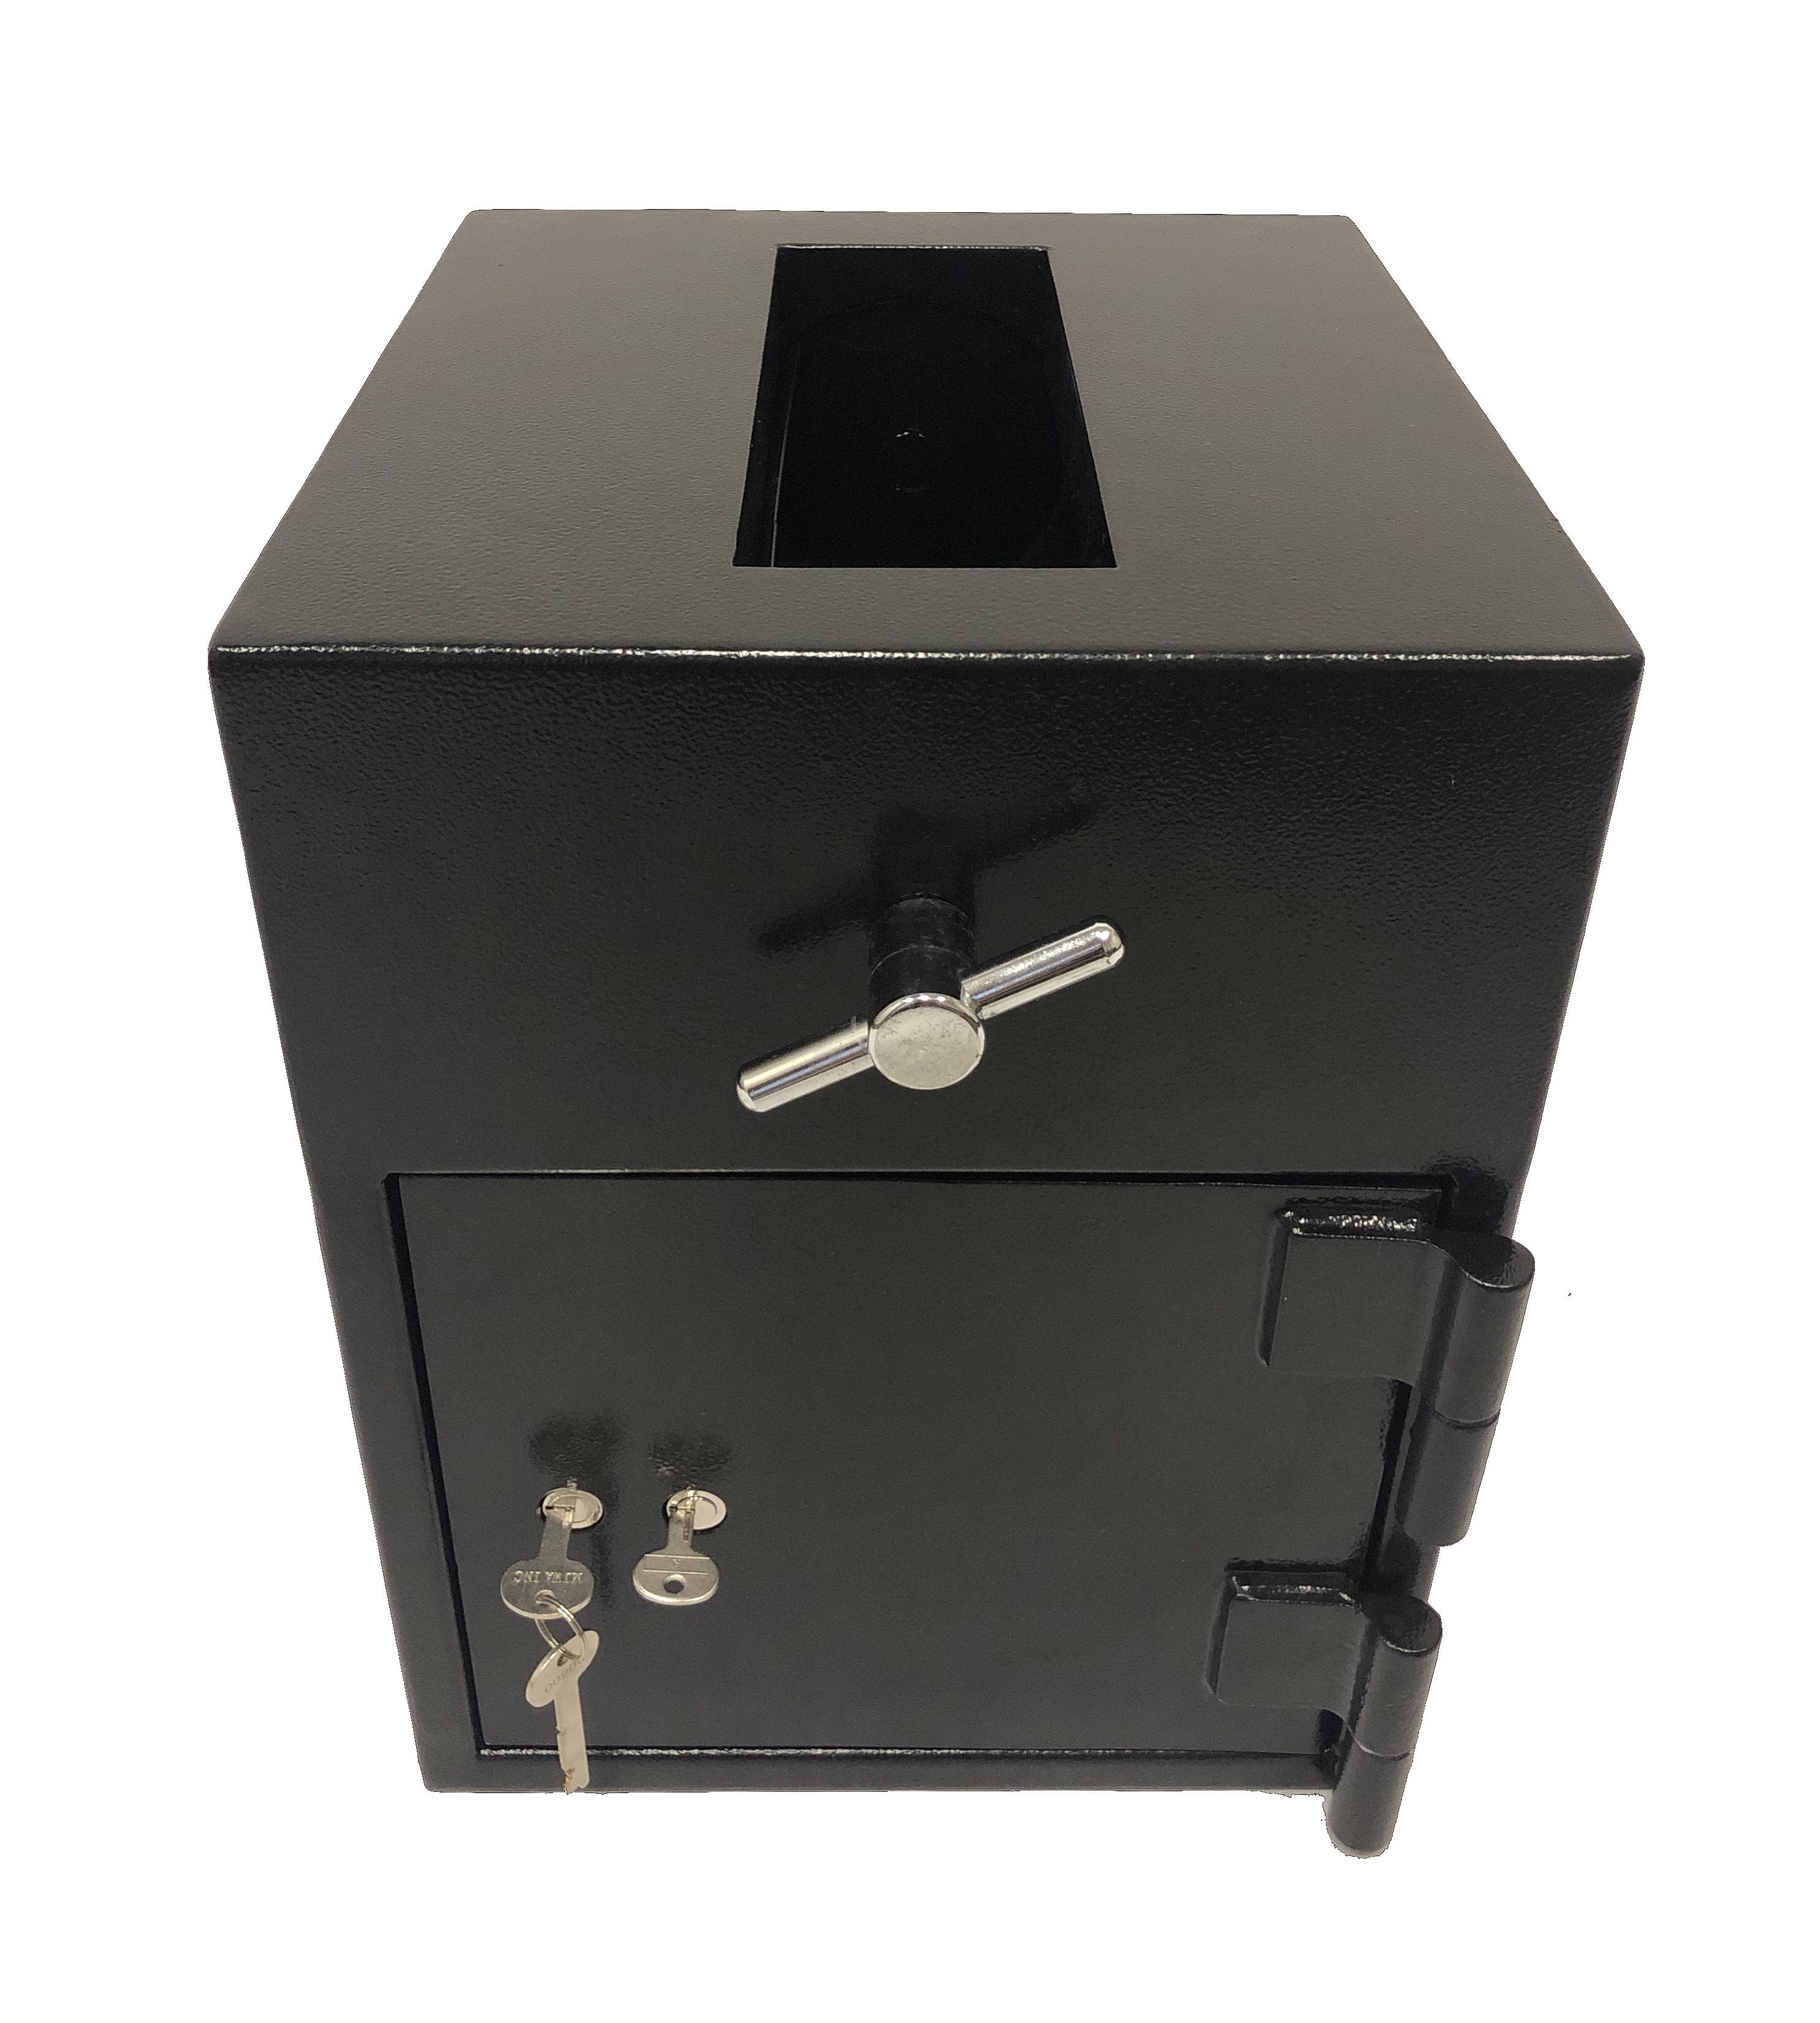 small safe for home